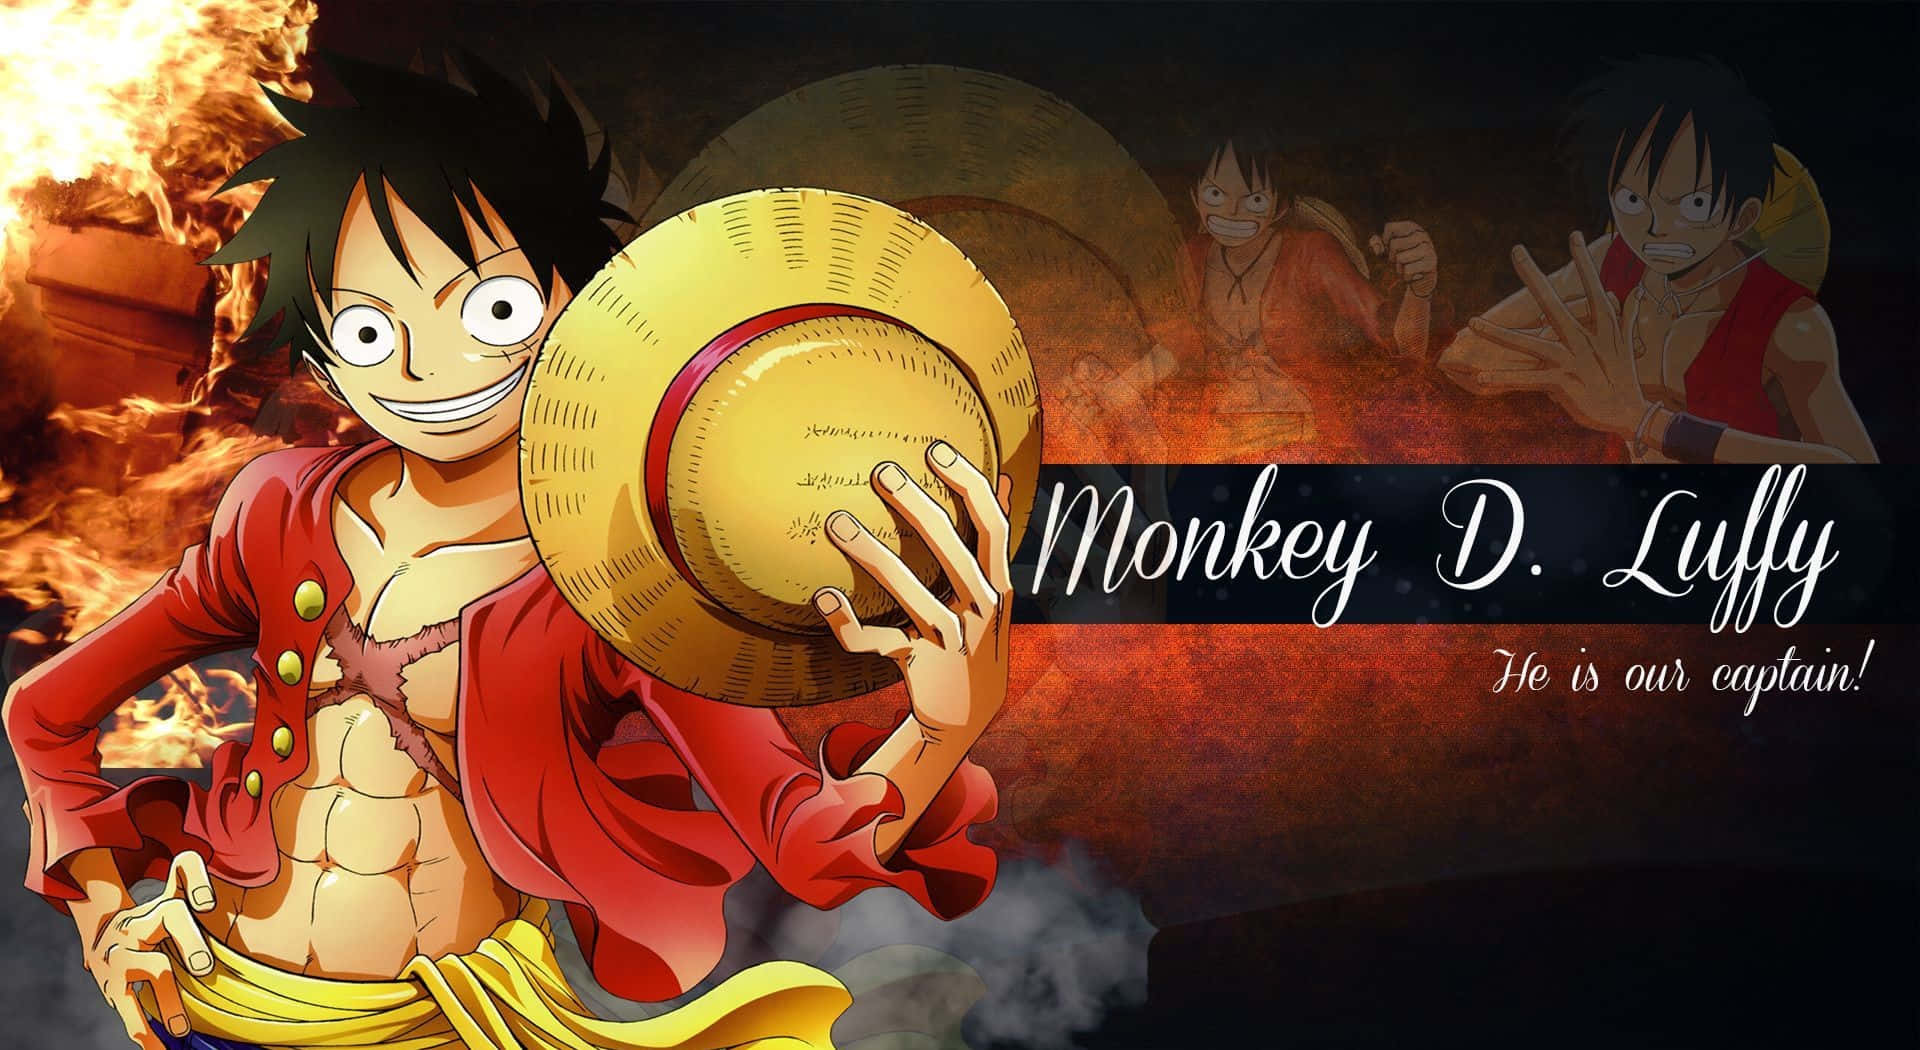 A cool Luffy wallpaper featuring the pirate king Wallpaper